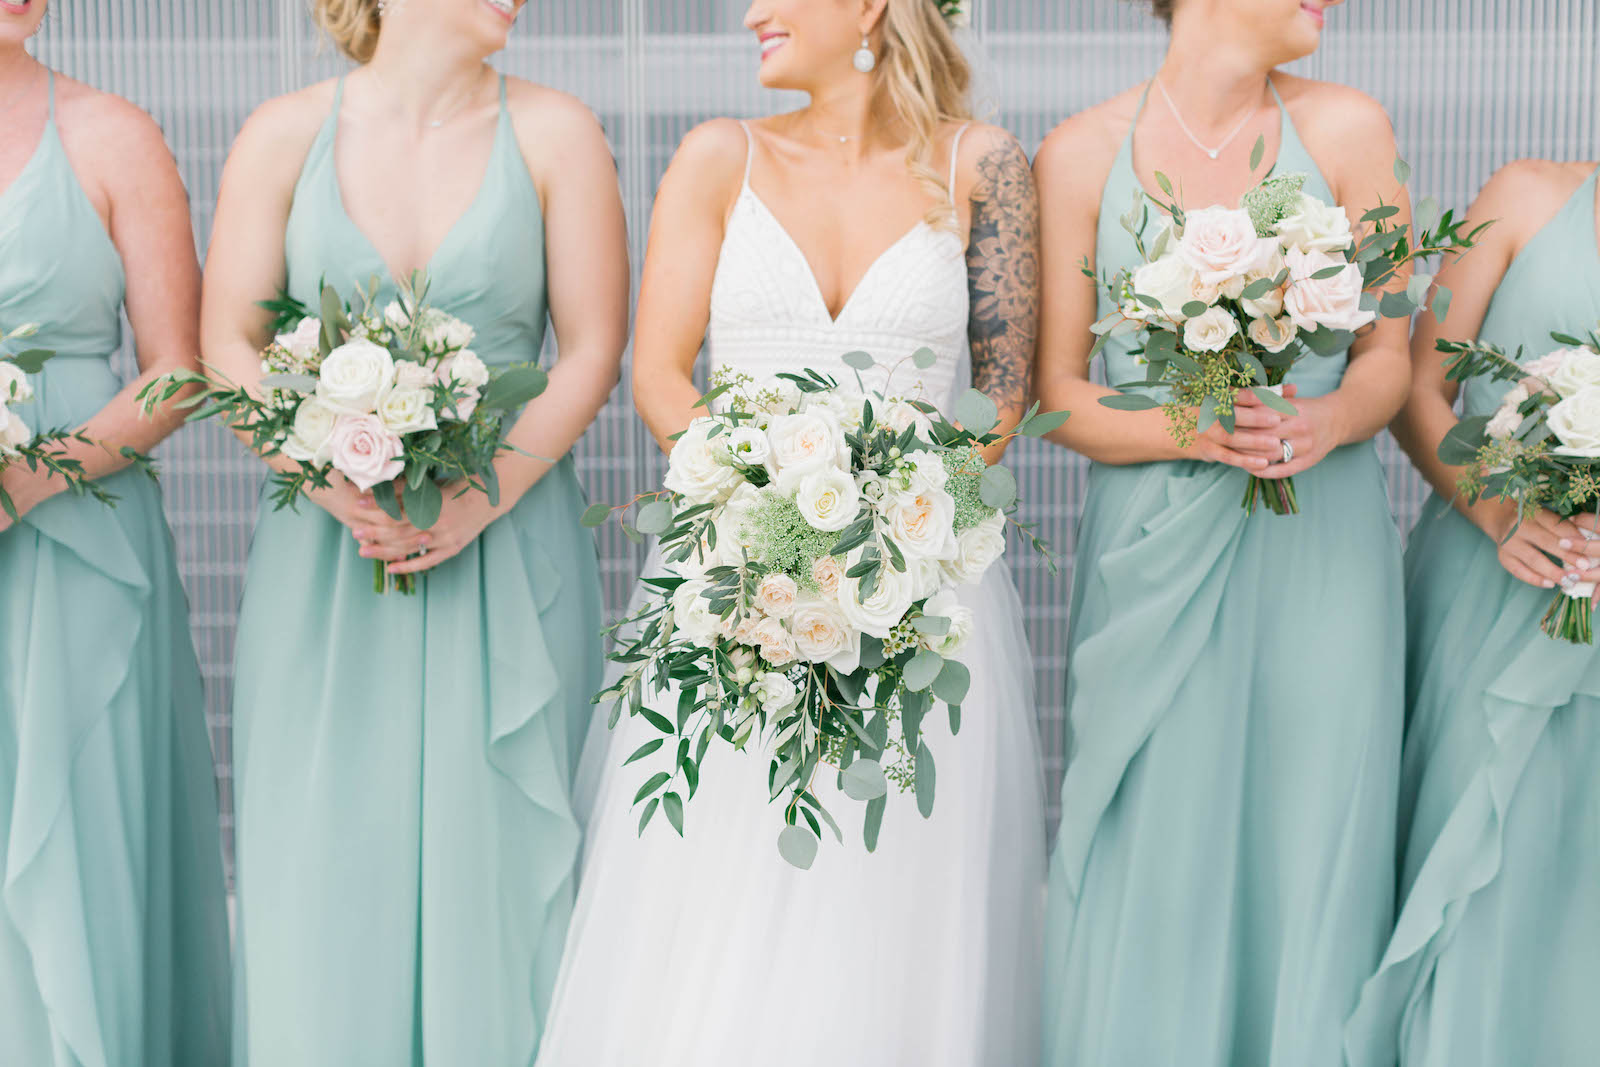 Boho Chic Bride in A-Line V Neckline Spaghetti Strap Wedding Dress with Tulle Skirt, Bridesmaids in Matching Sage Green Dresses Holding Ivory Roses and Greenery Floral Bouquets | Tampa Bay Wedding Florist Bruce Wayne Florals